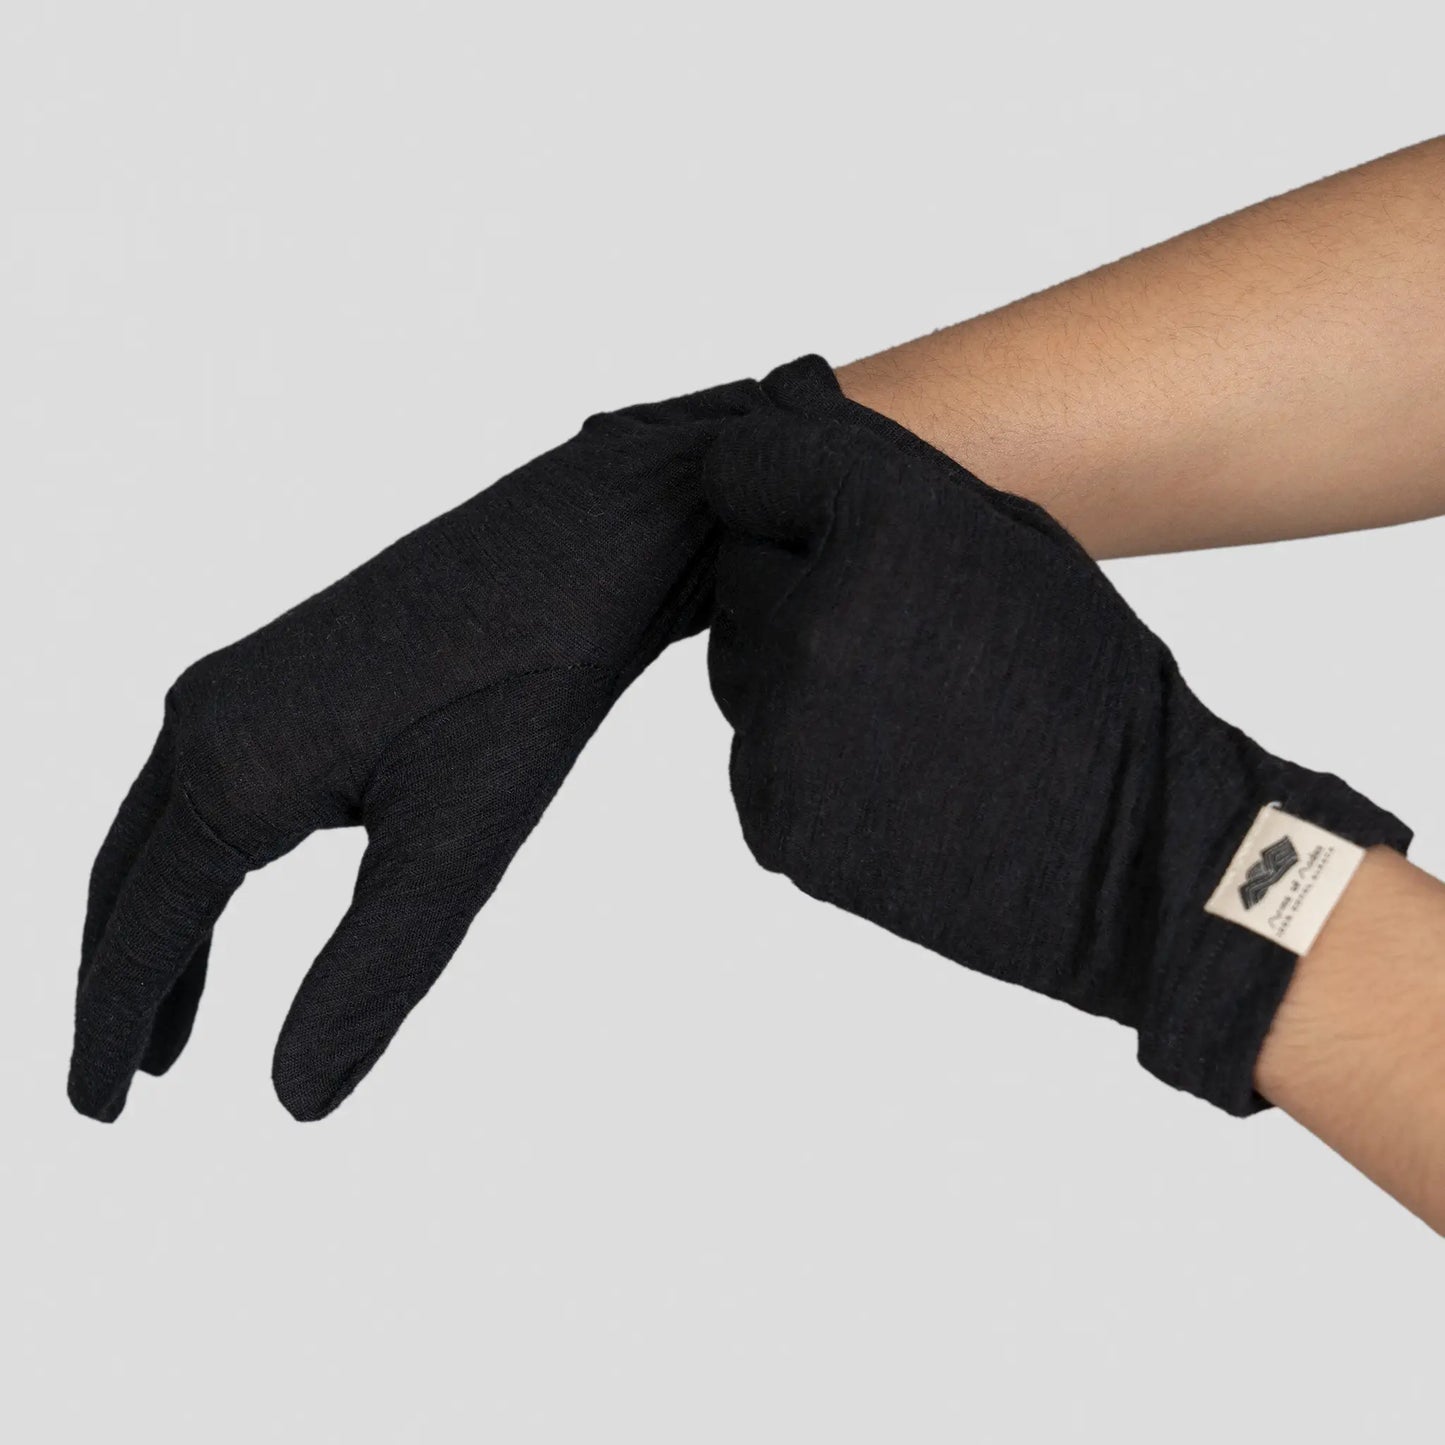 glove thermal wool liners ultralight color black